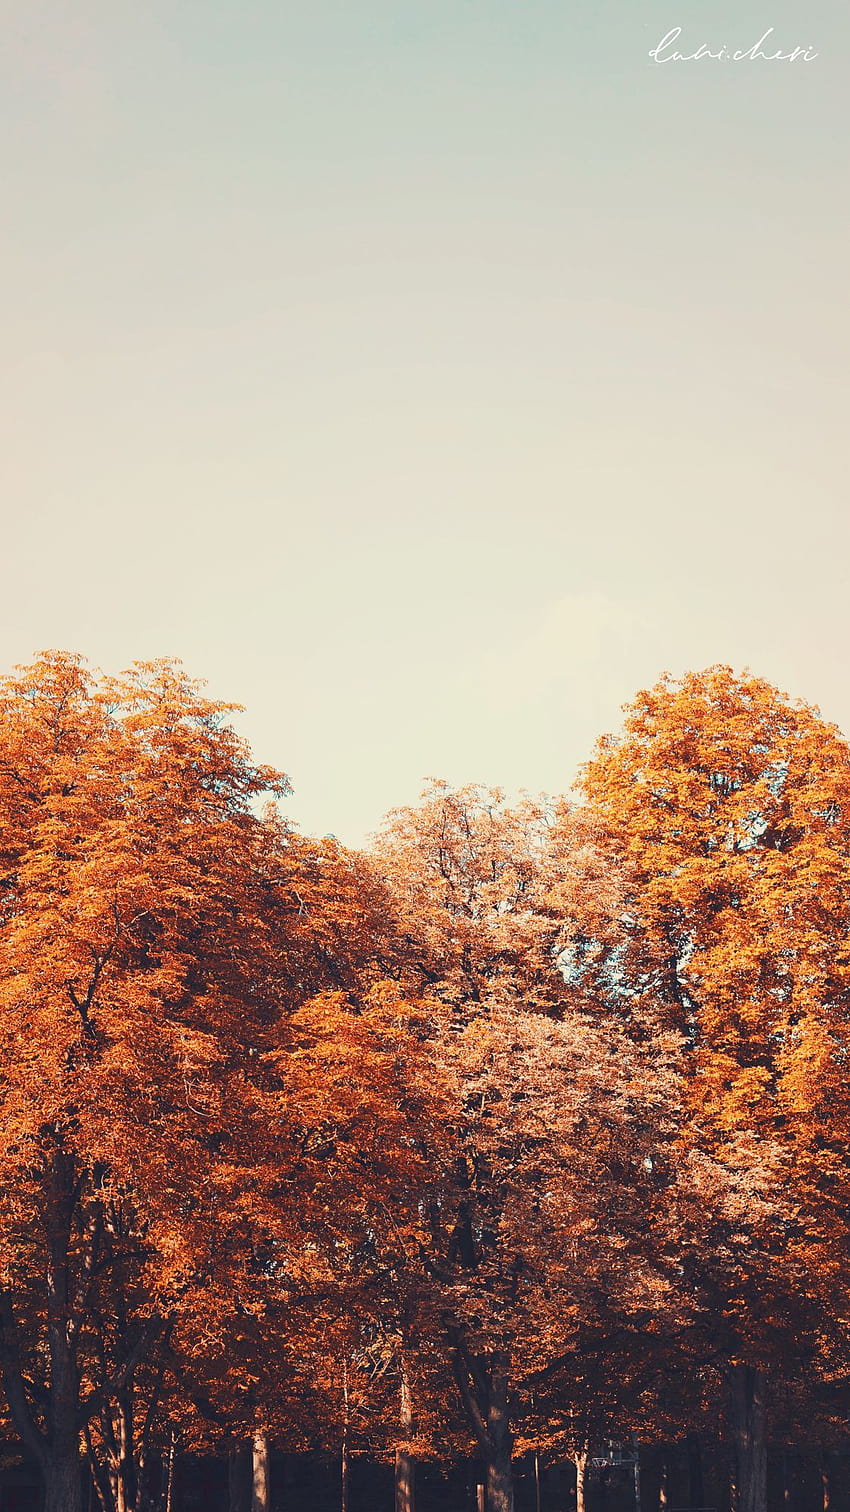 Aesthetic Fall For Iphone, vintage aesthetic autumn HD phone wallpaper